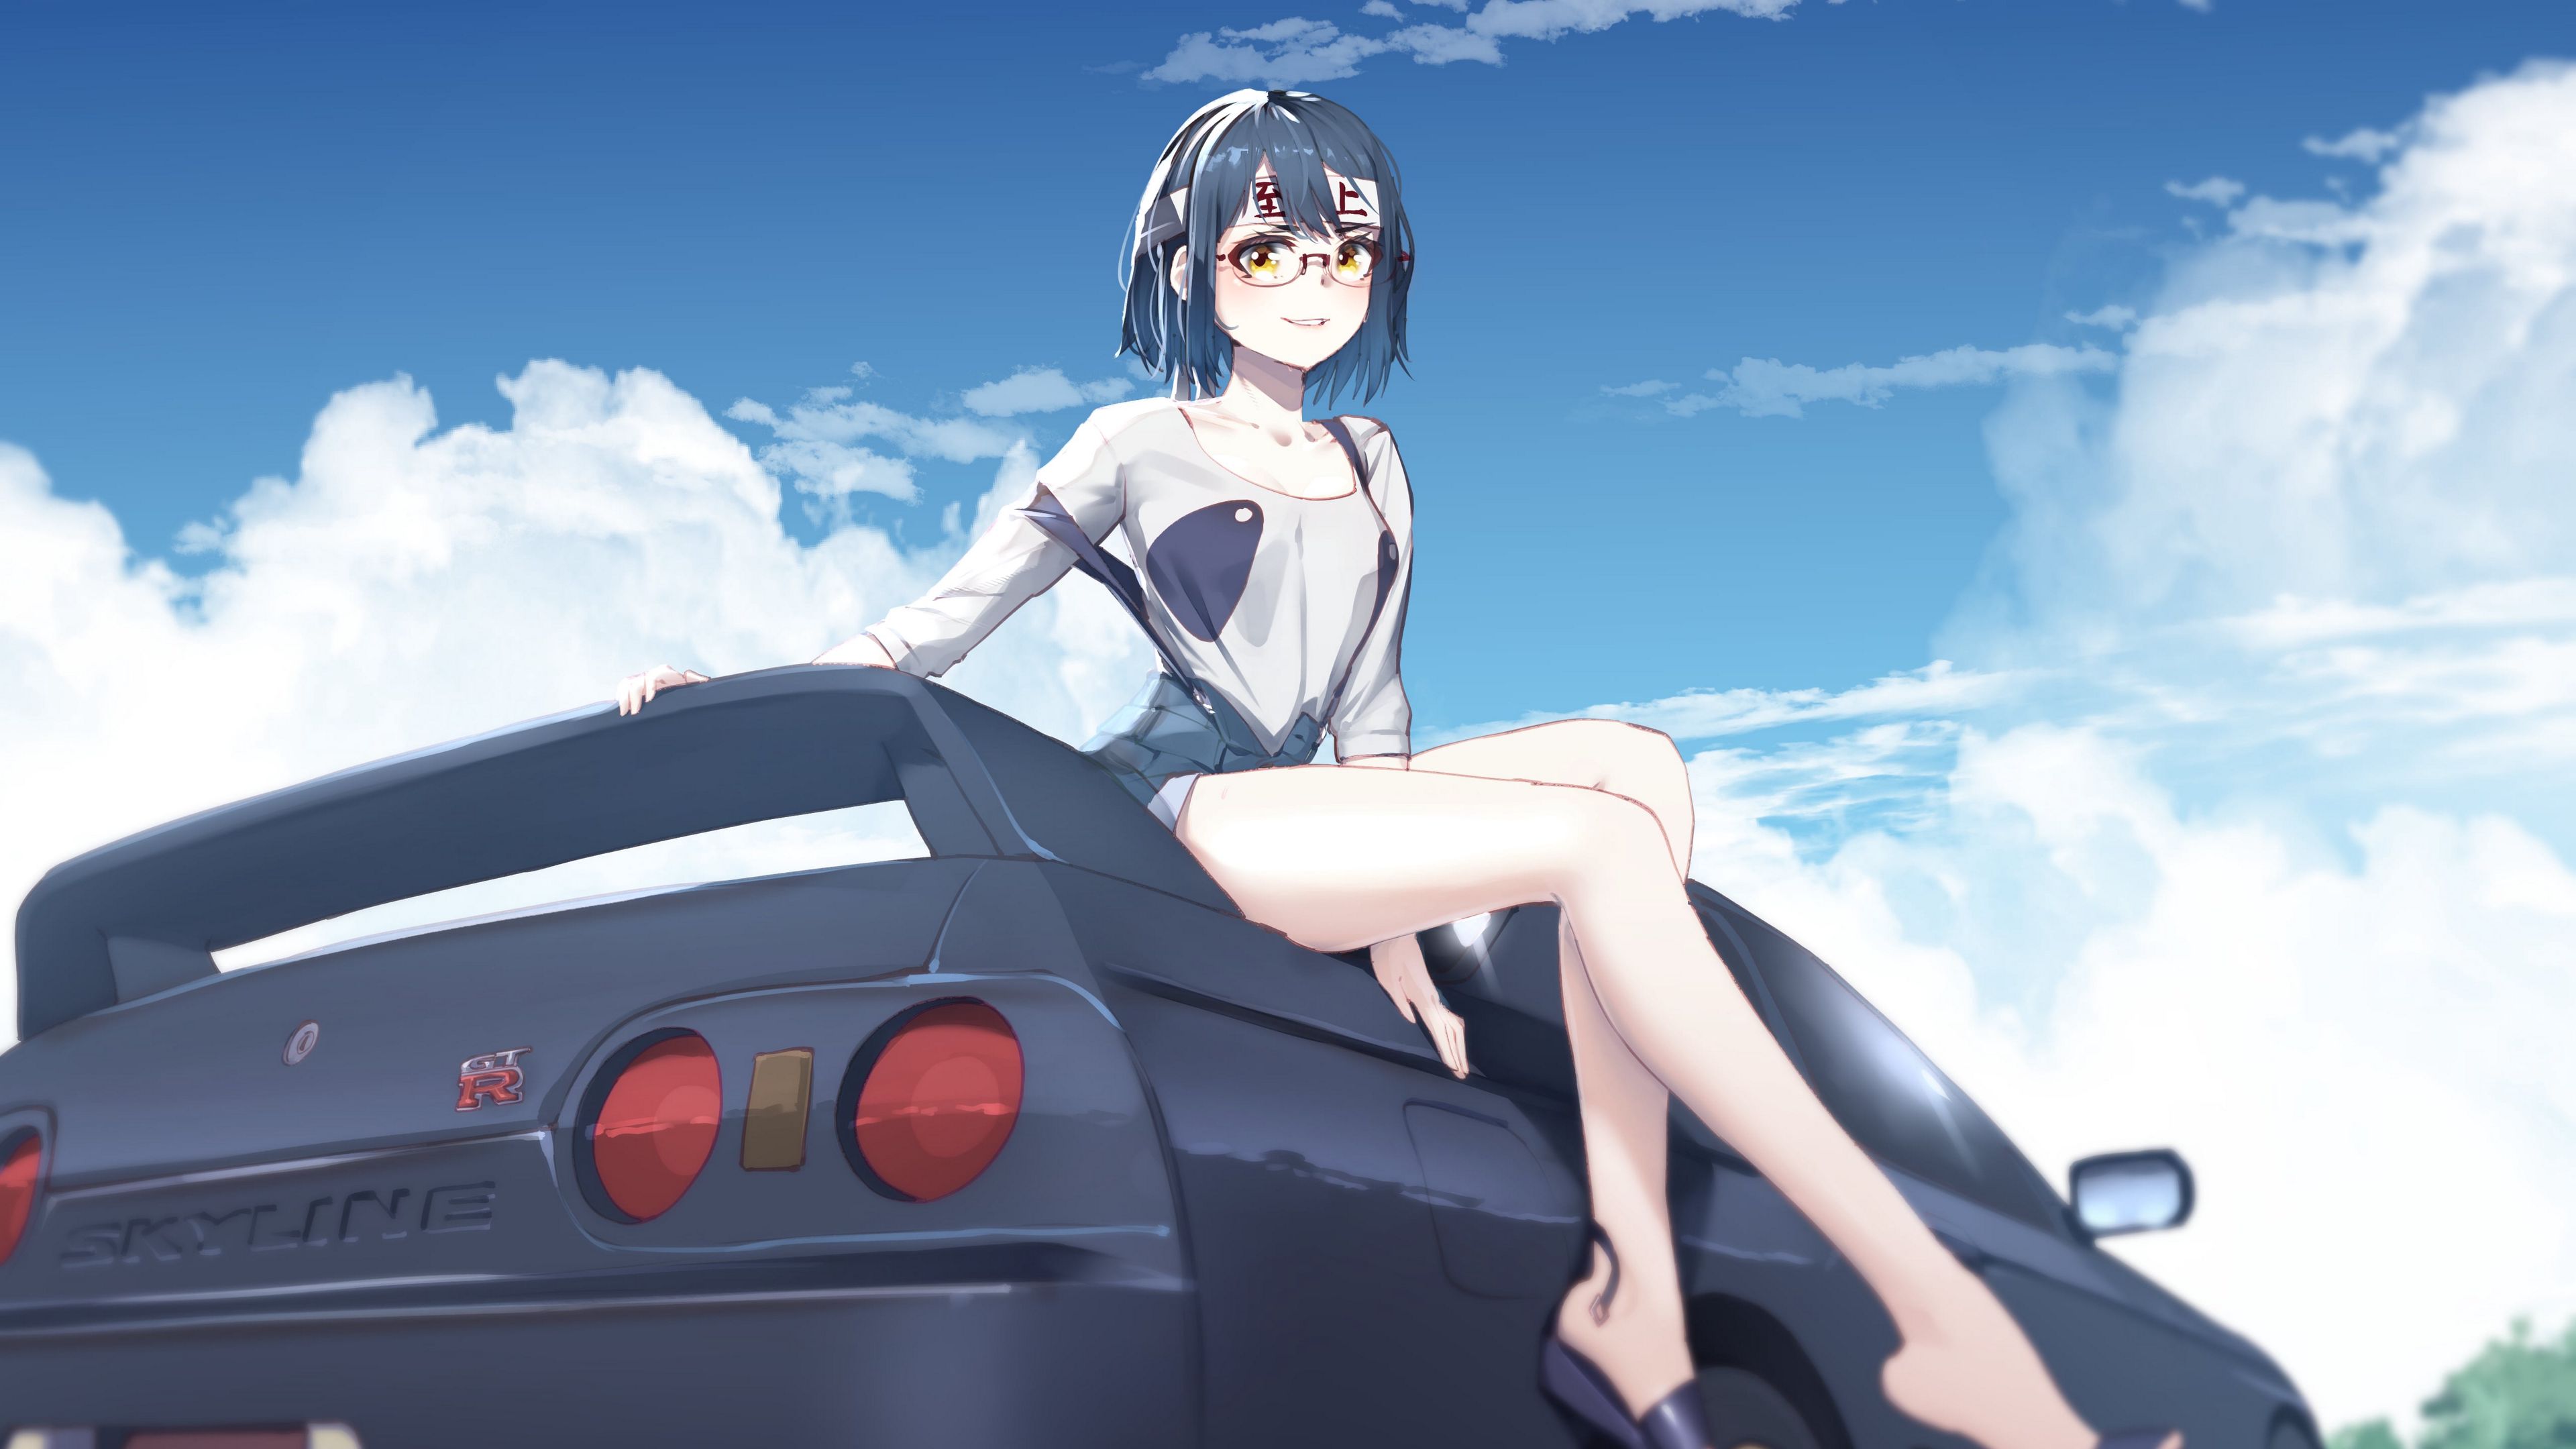 Download Free JDM Anime Wallpaper. Discover more Anime, Car, JDM, JDM Anime,  JDM Car wallpaper. | Anime artwork wallpaper, Anime wallpaper, Japan 80's  aesthetic